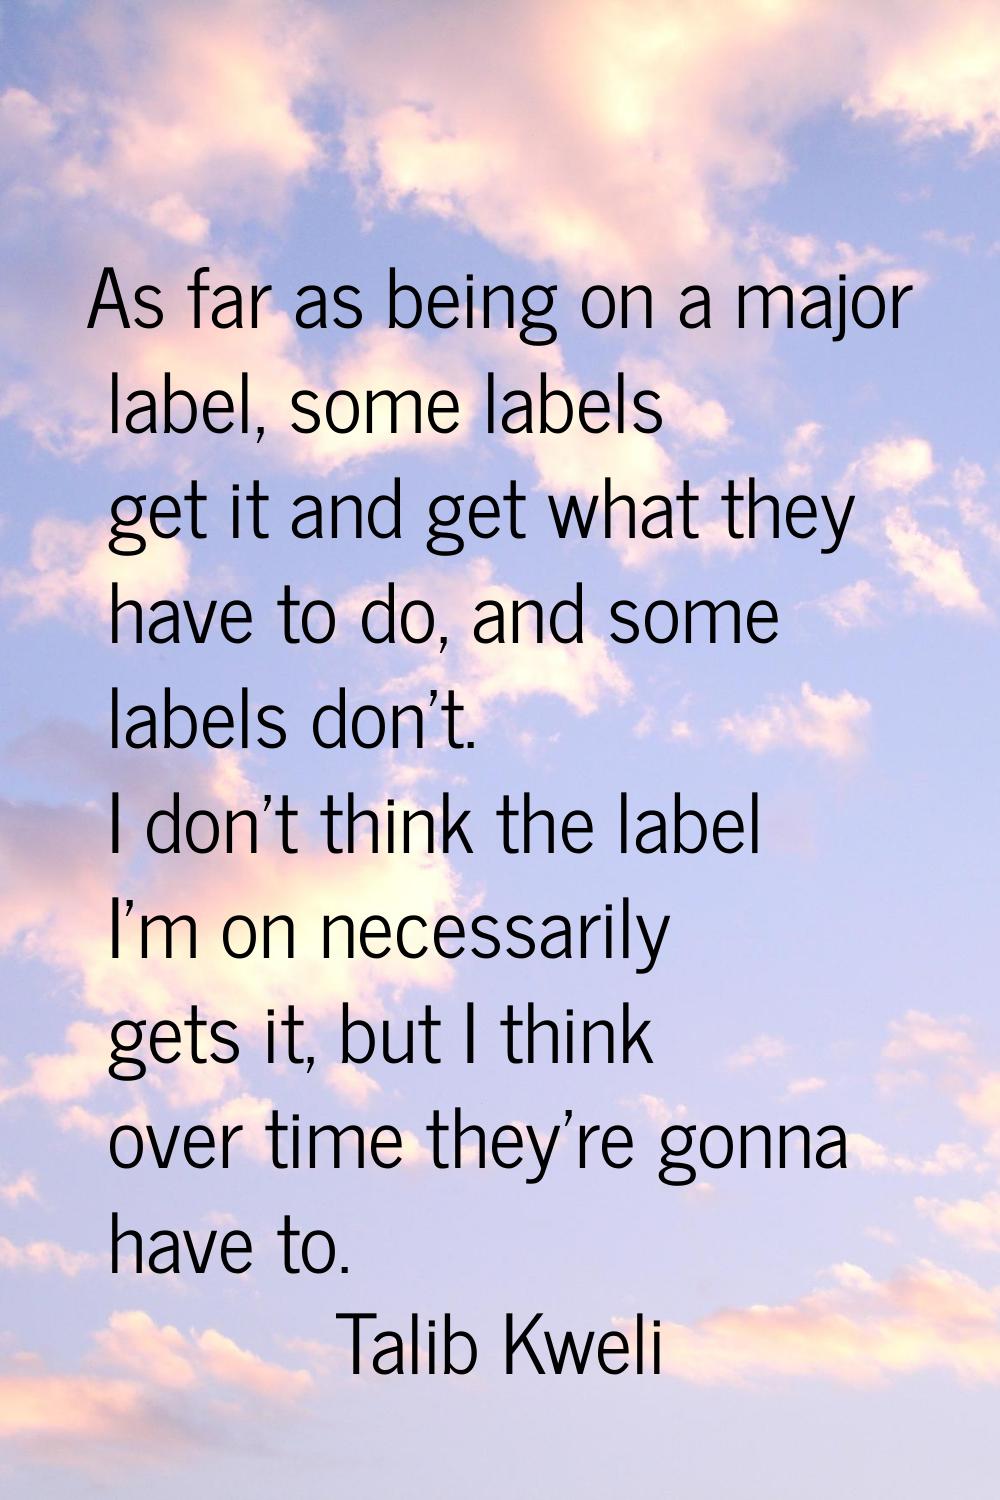 As far as being on a major label, some labels get it and get what they have to do, and some labels 